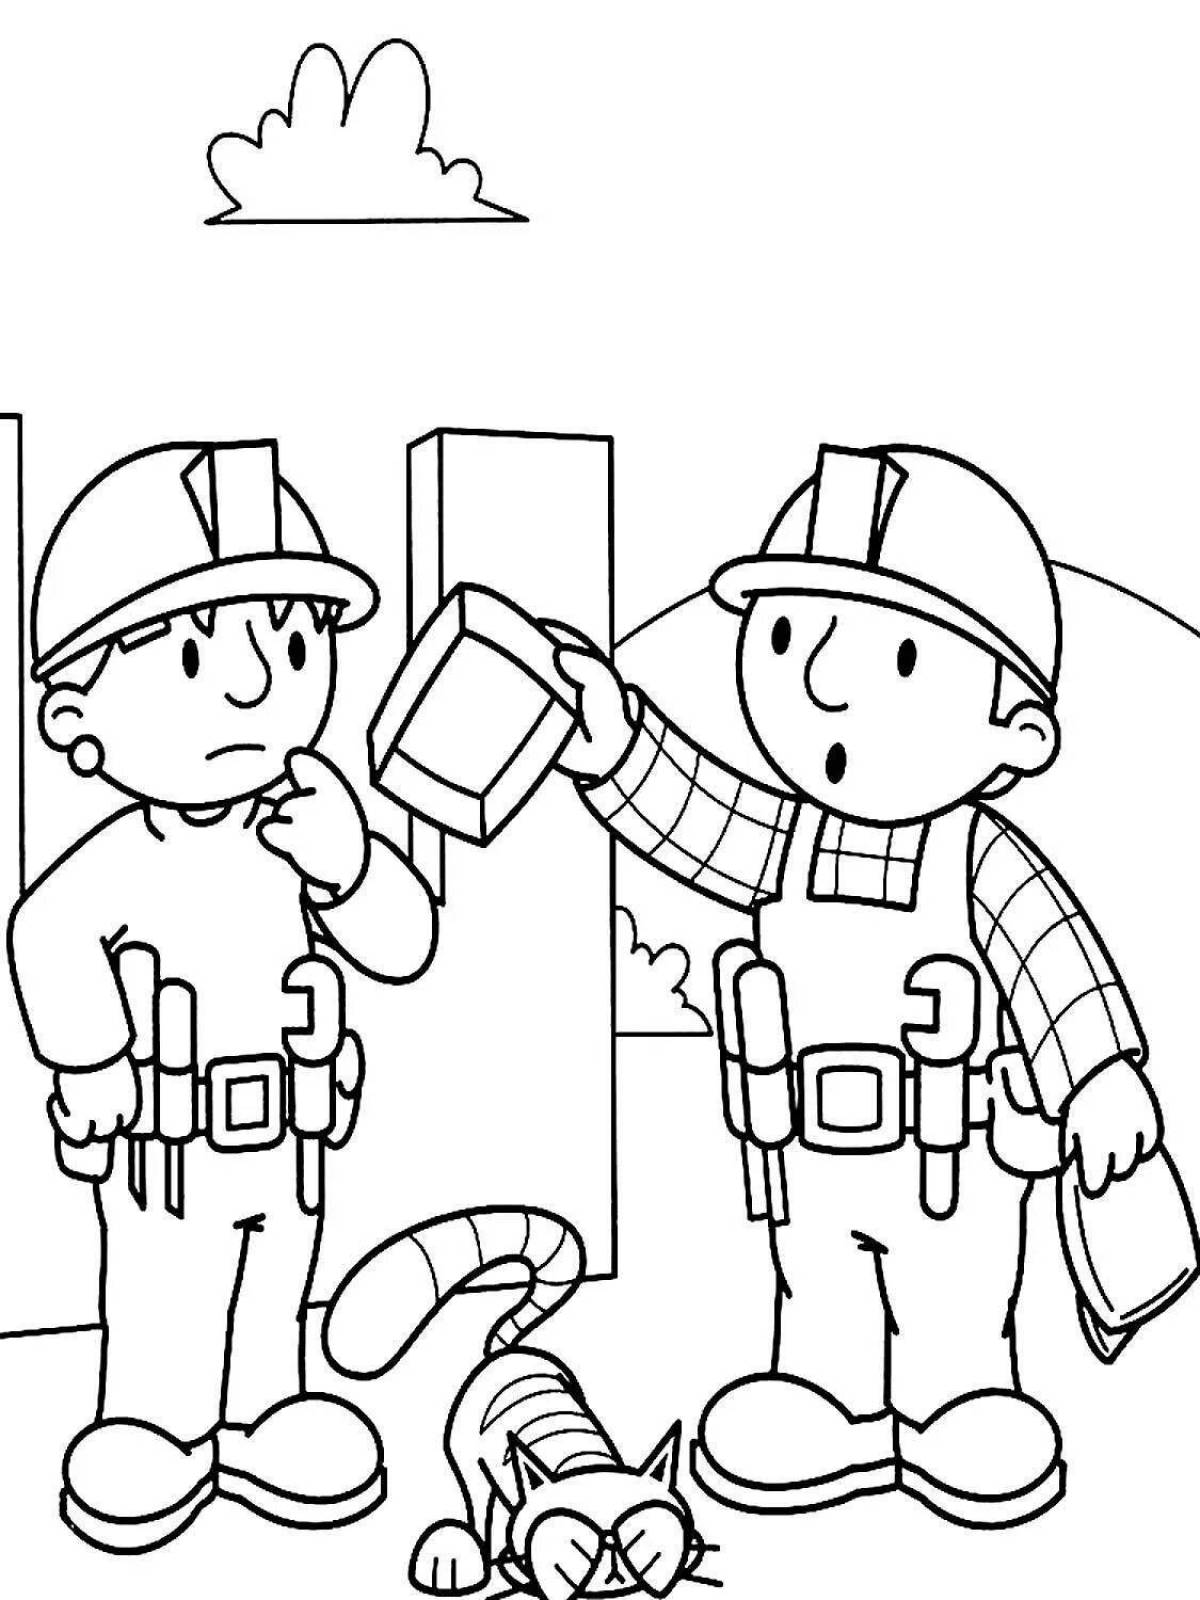 Coloring book strike for labor protection